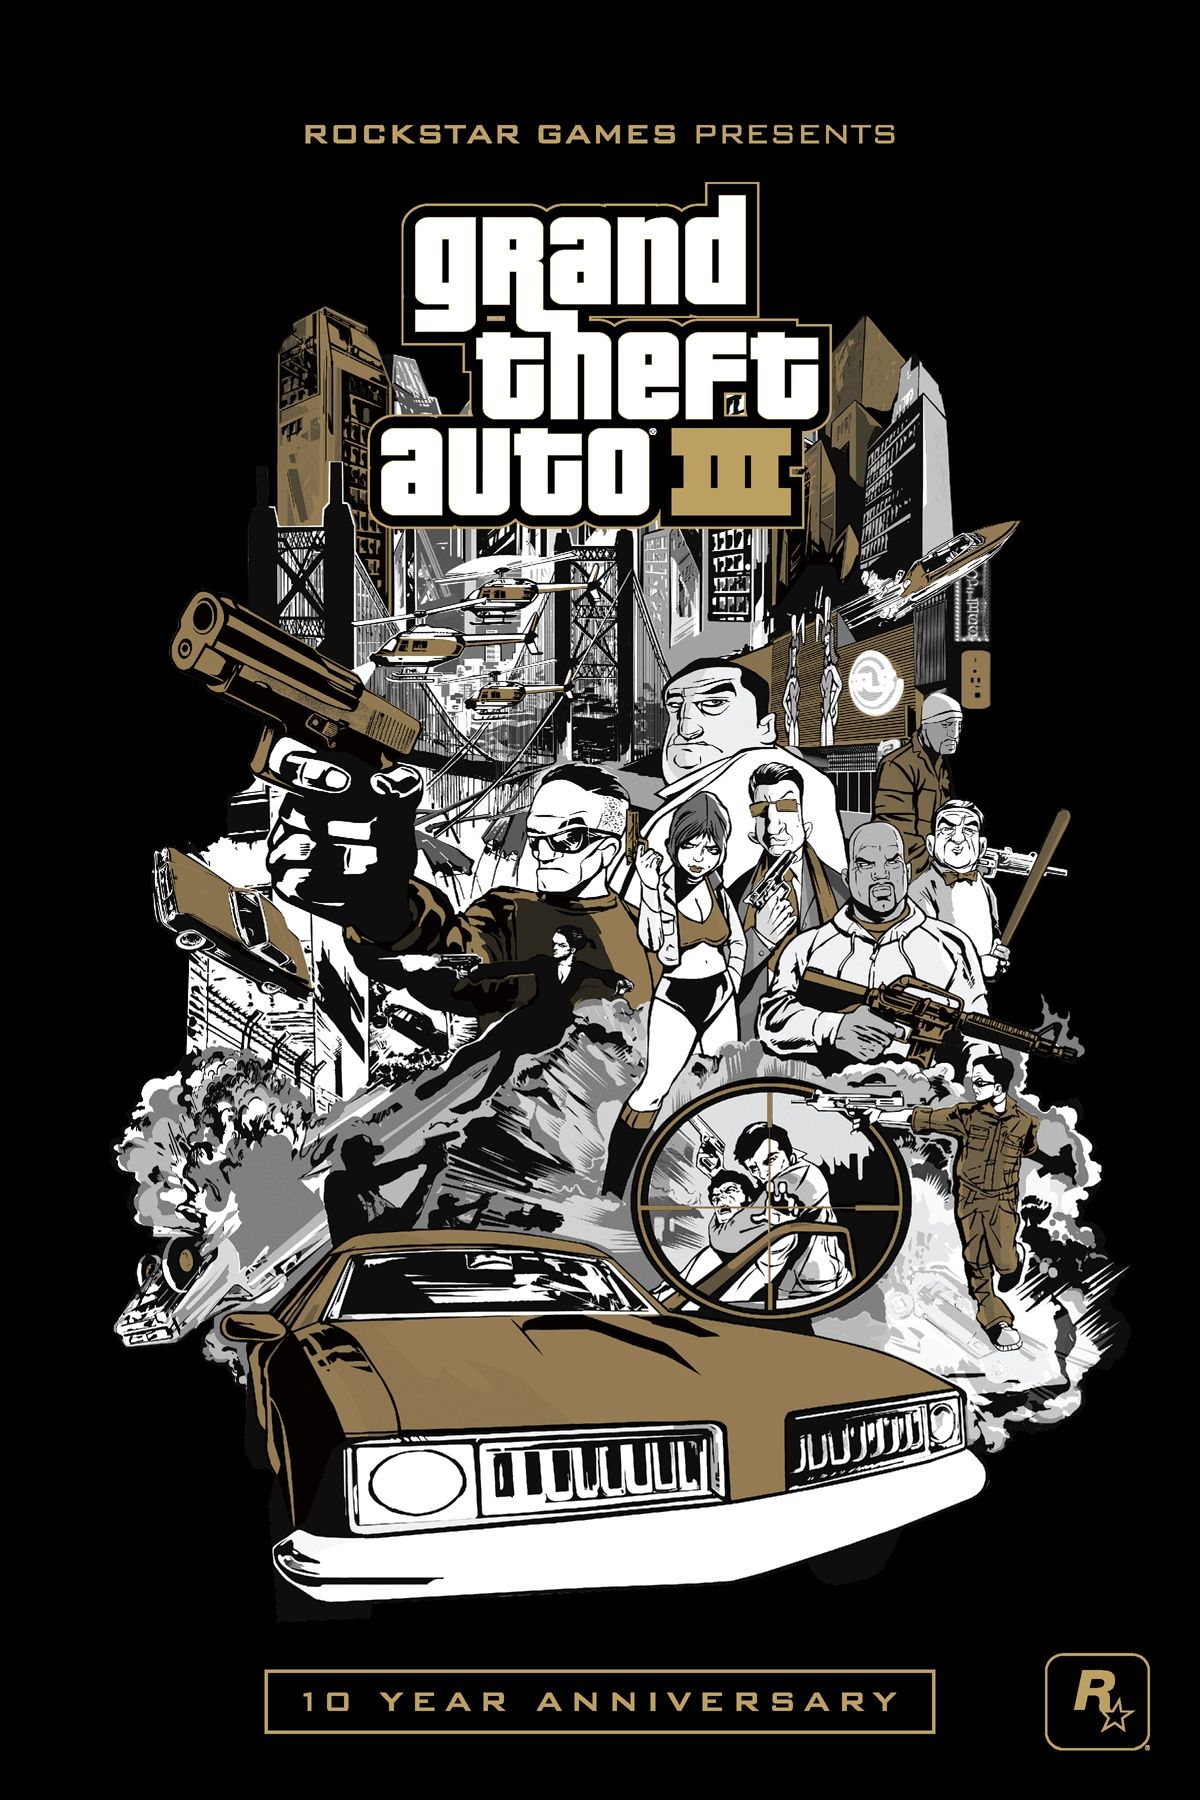 Grand Theft Auto 3 Wallpapers